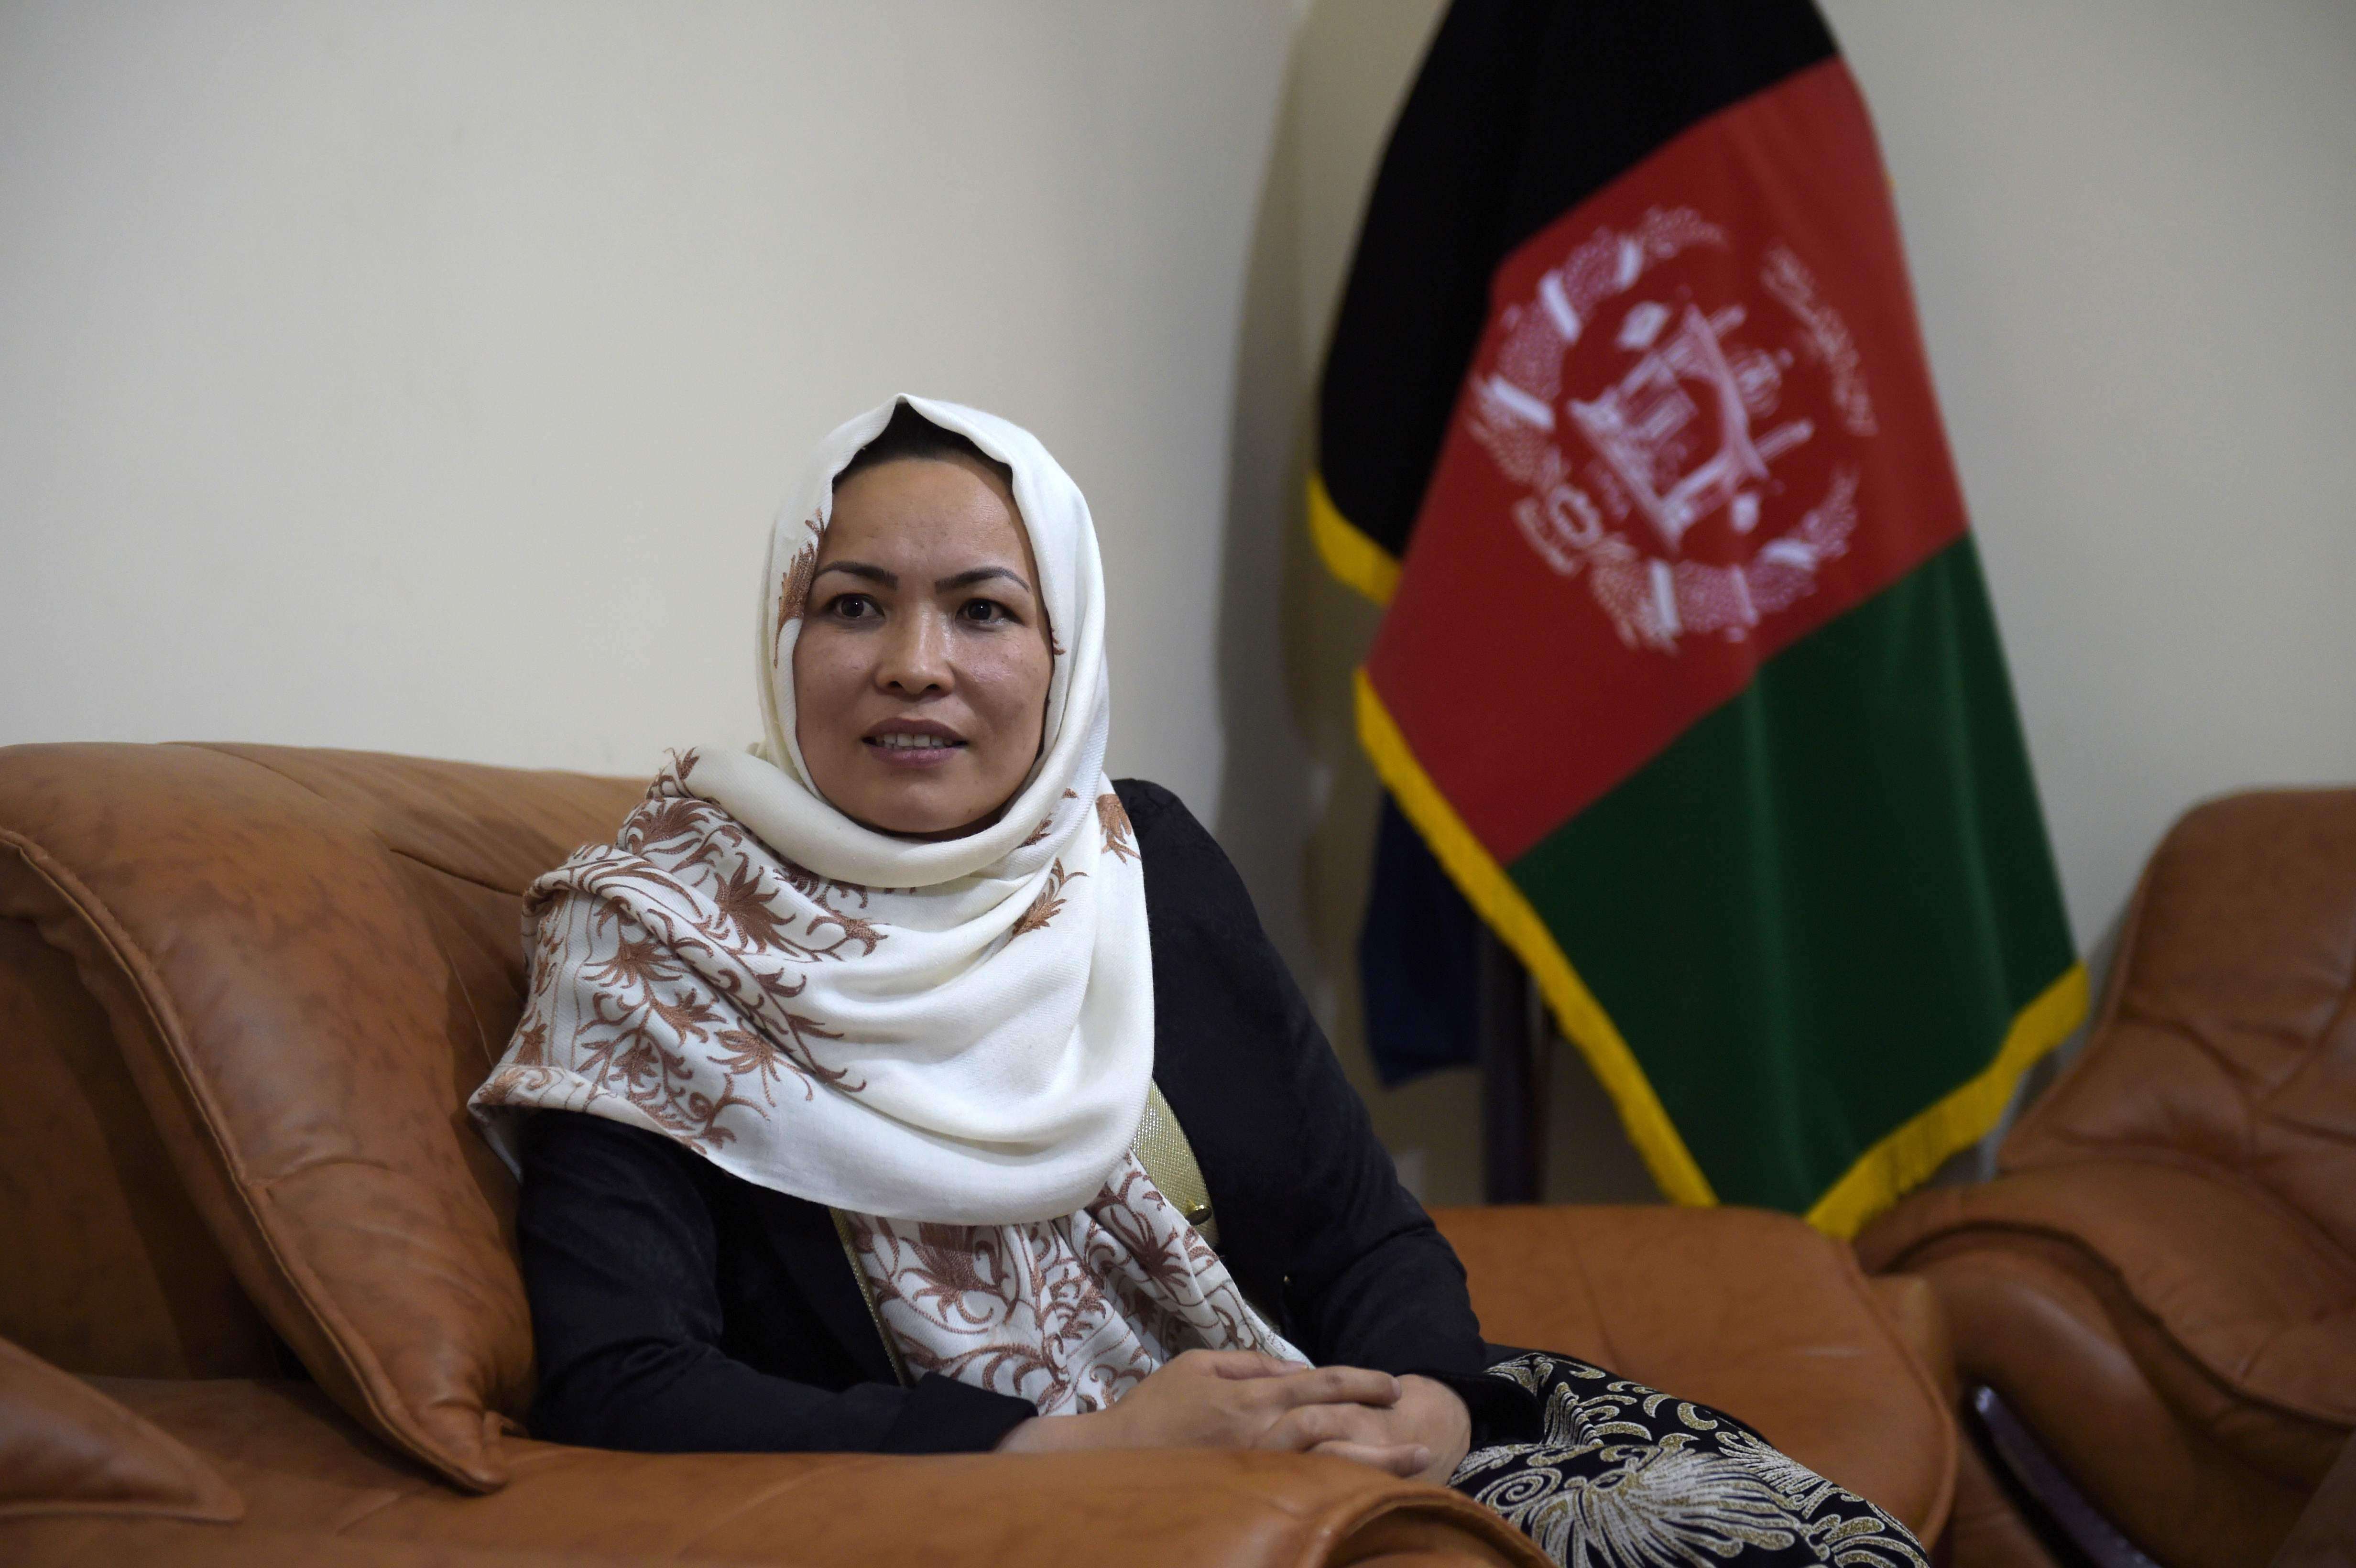 This photograph taken on May 10, 2016, shows Afghan Hazara tribe female governor of Daikundi province Masooma Muradi talking with an AFP reporter during an interview at her residence in Nili, capital of Daikundi province. Breaking new ground as Afghanistan's only female governor, Muradi's ascent to the top post in remote Daikundi province is a remarkable feat in Afghanistan, where stubborn patriarchal traditions are at odds with progressive ideas about a woman's place in the world. / AFP PHOTO / SHAH MARAI / TO GO WITH AFP STORY:  Afghanistan-unrest-politics-women FEATURE by ANUJ CHOPRA